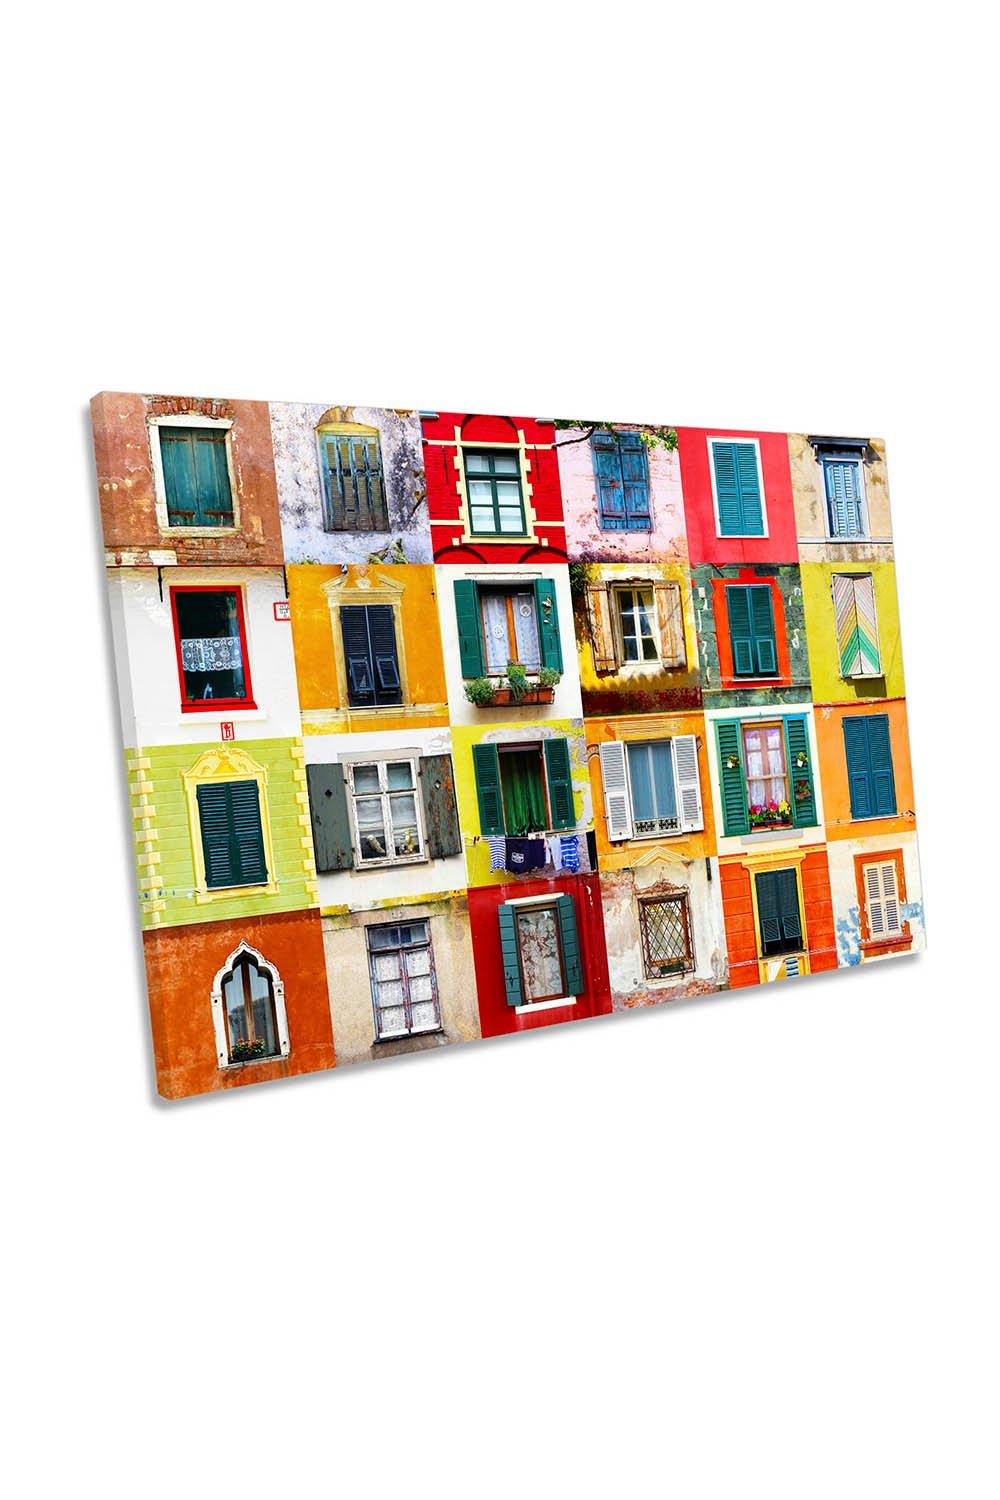 Just Windows and Shutters Home Canvas Wall Art Picture Print